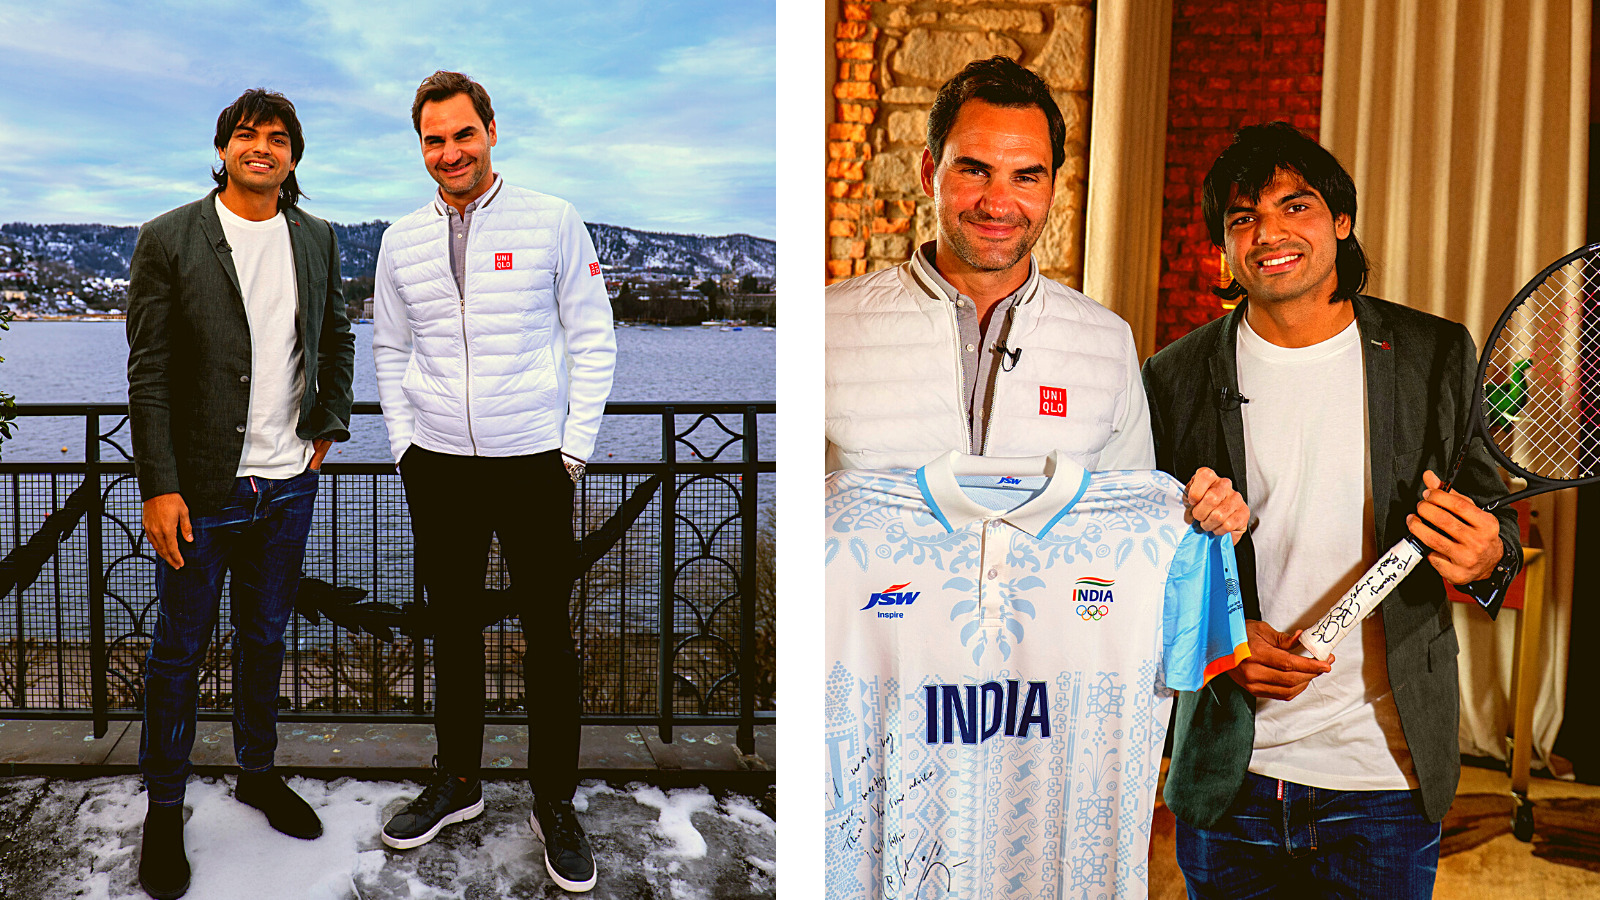 Roger Federer meets Neeraj Chopra, says: 'Amazed by how much